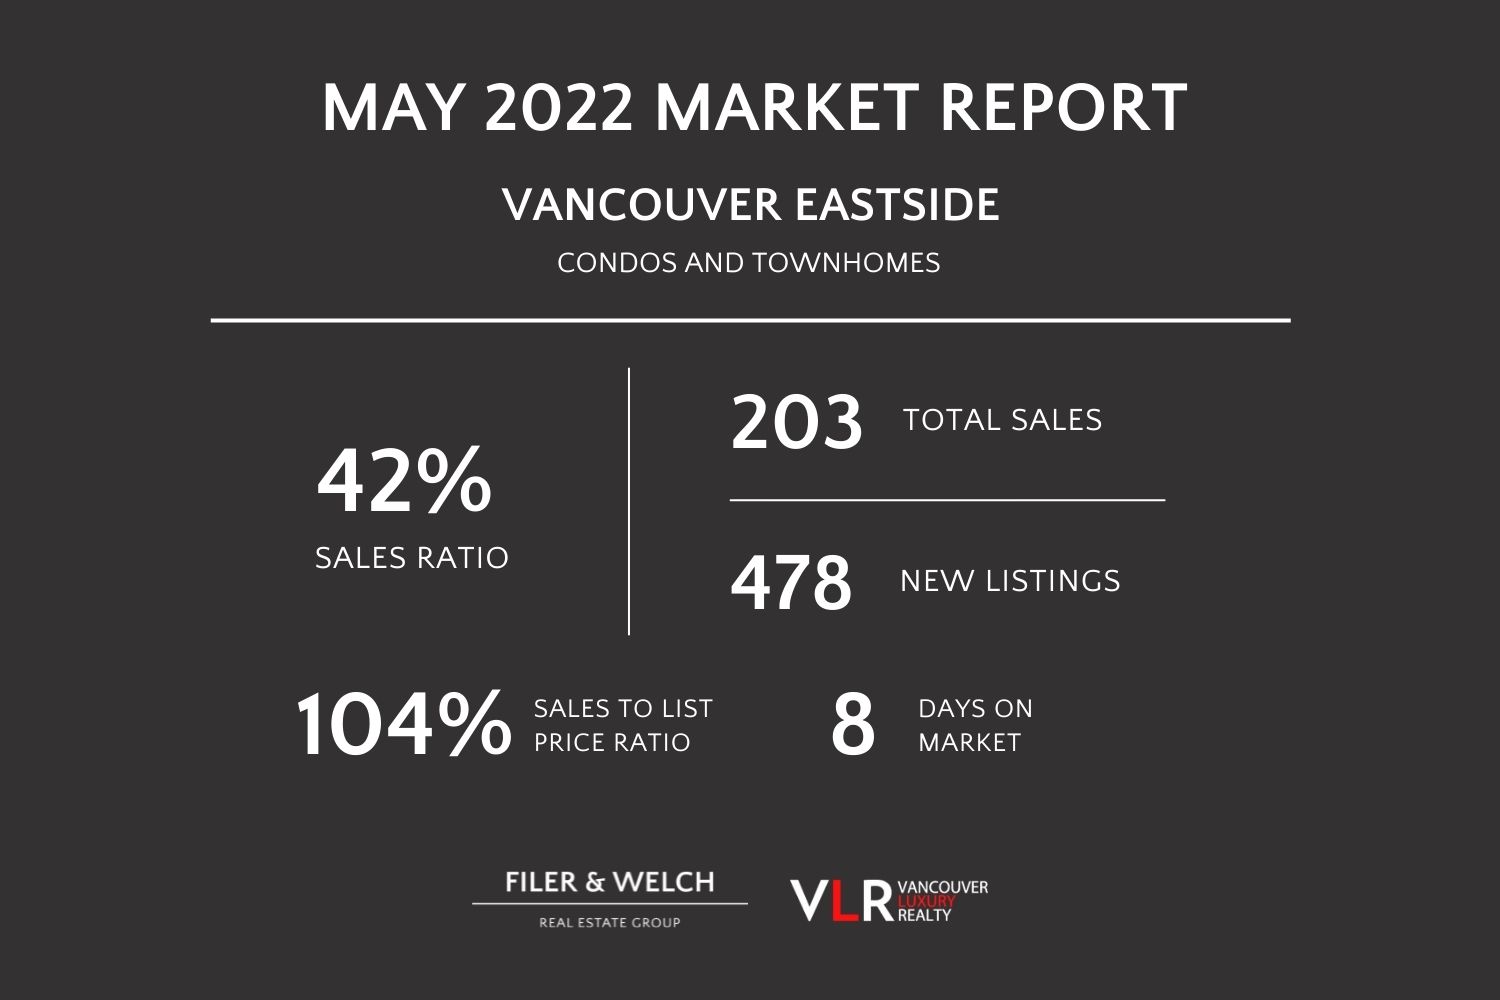 Vancouver Eastside condos and townhomes may 2022